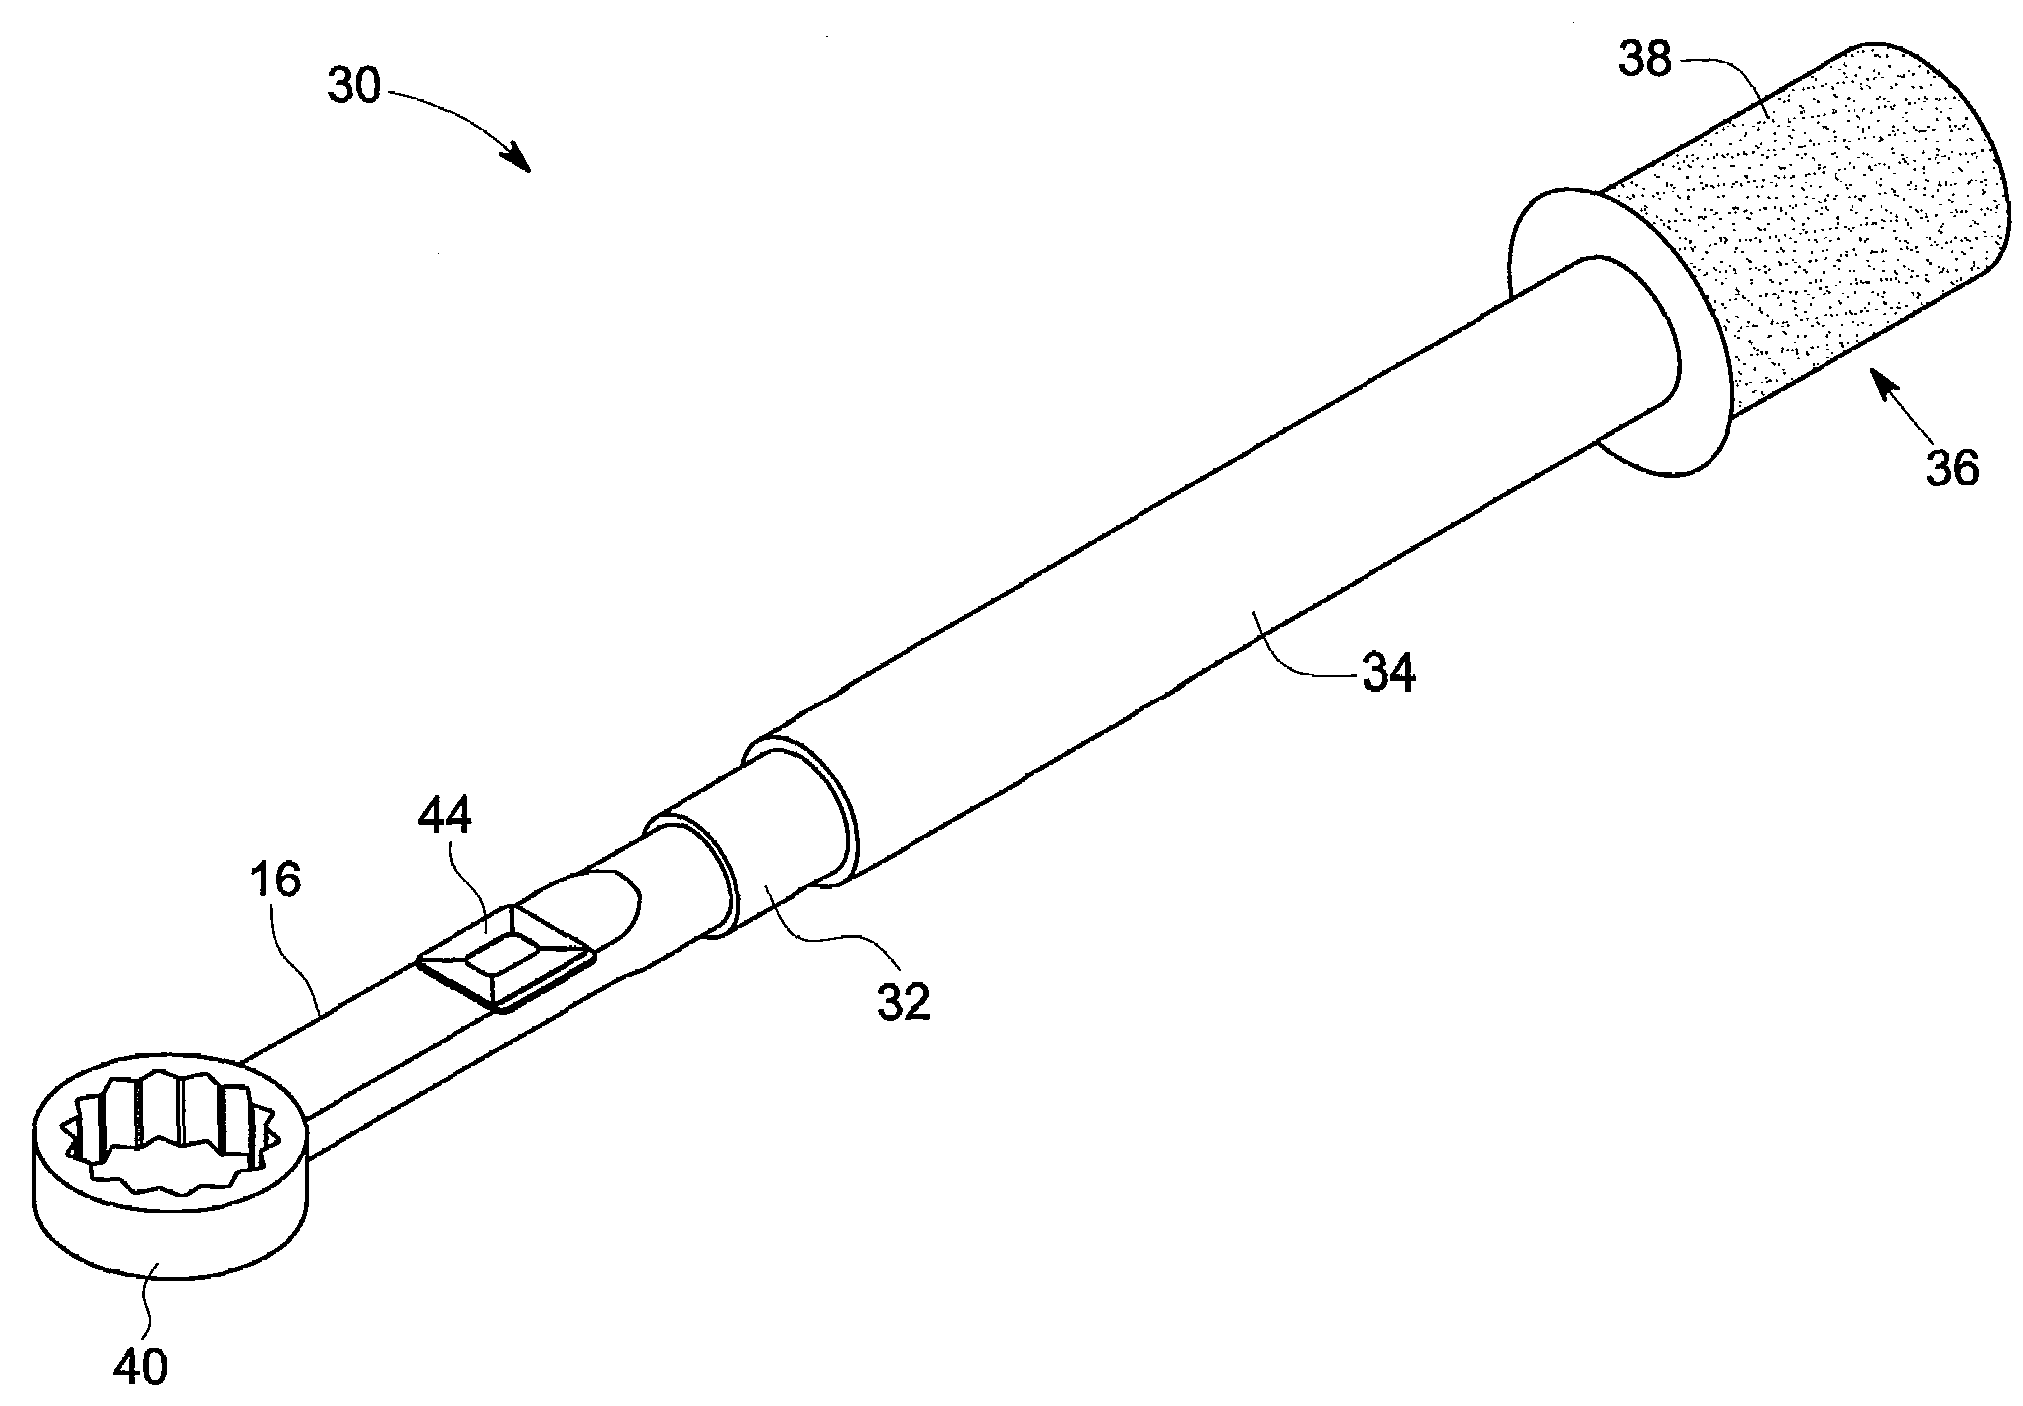 Wireless-enabled tightening system for fasteners and a method of operating the same